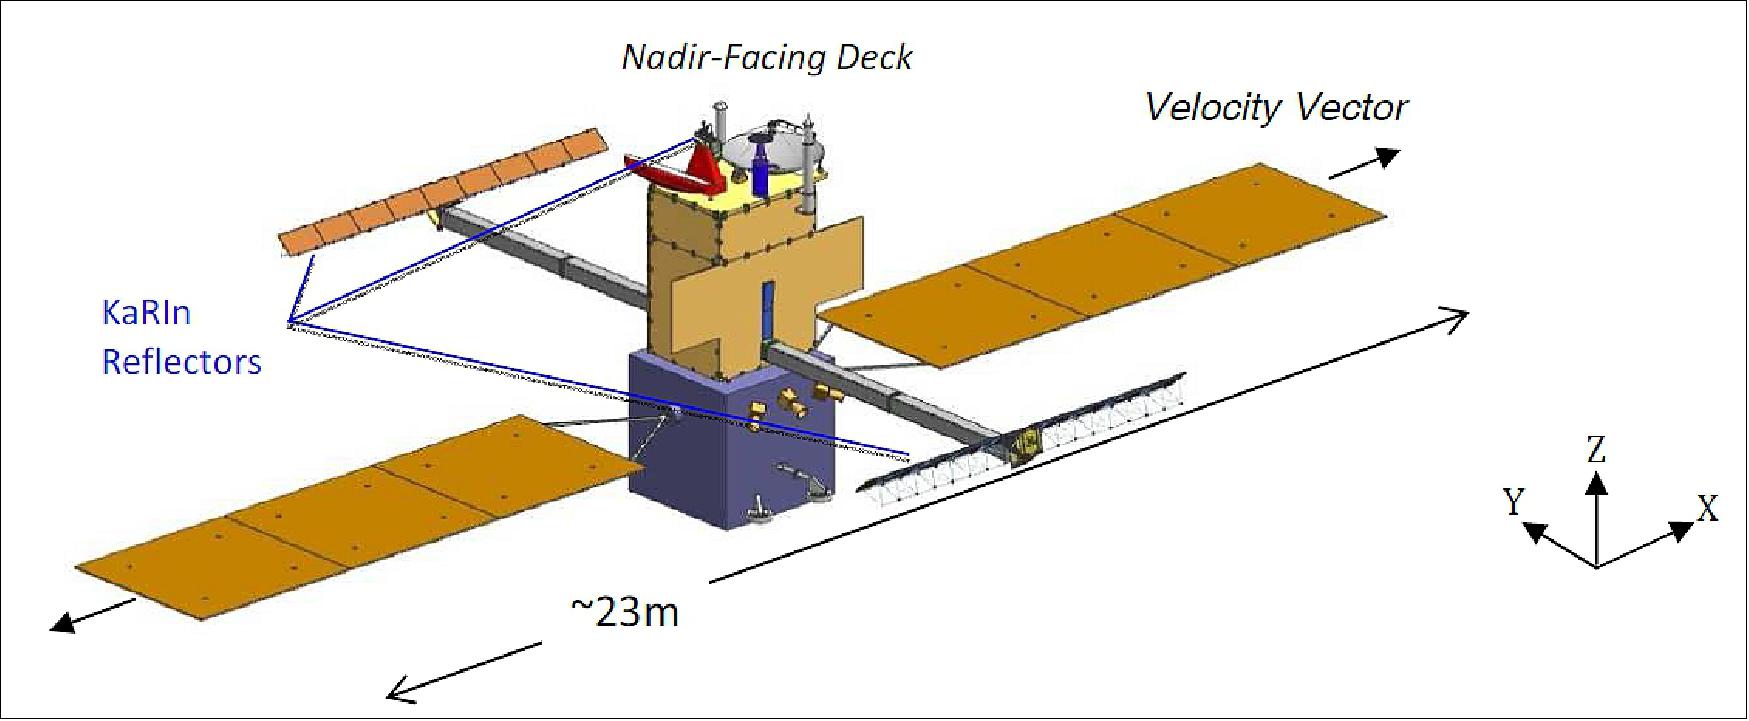 Figure 2: Illustration of the SWOT satellite in deployed configuration (image credit: CNES) 42)